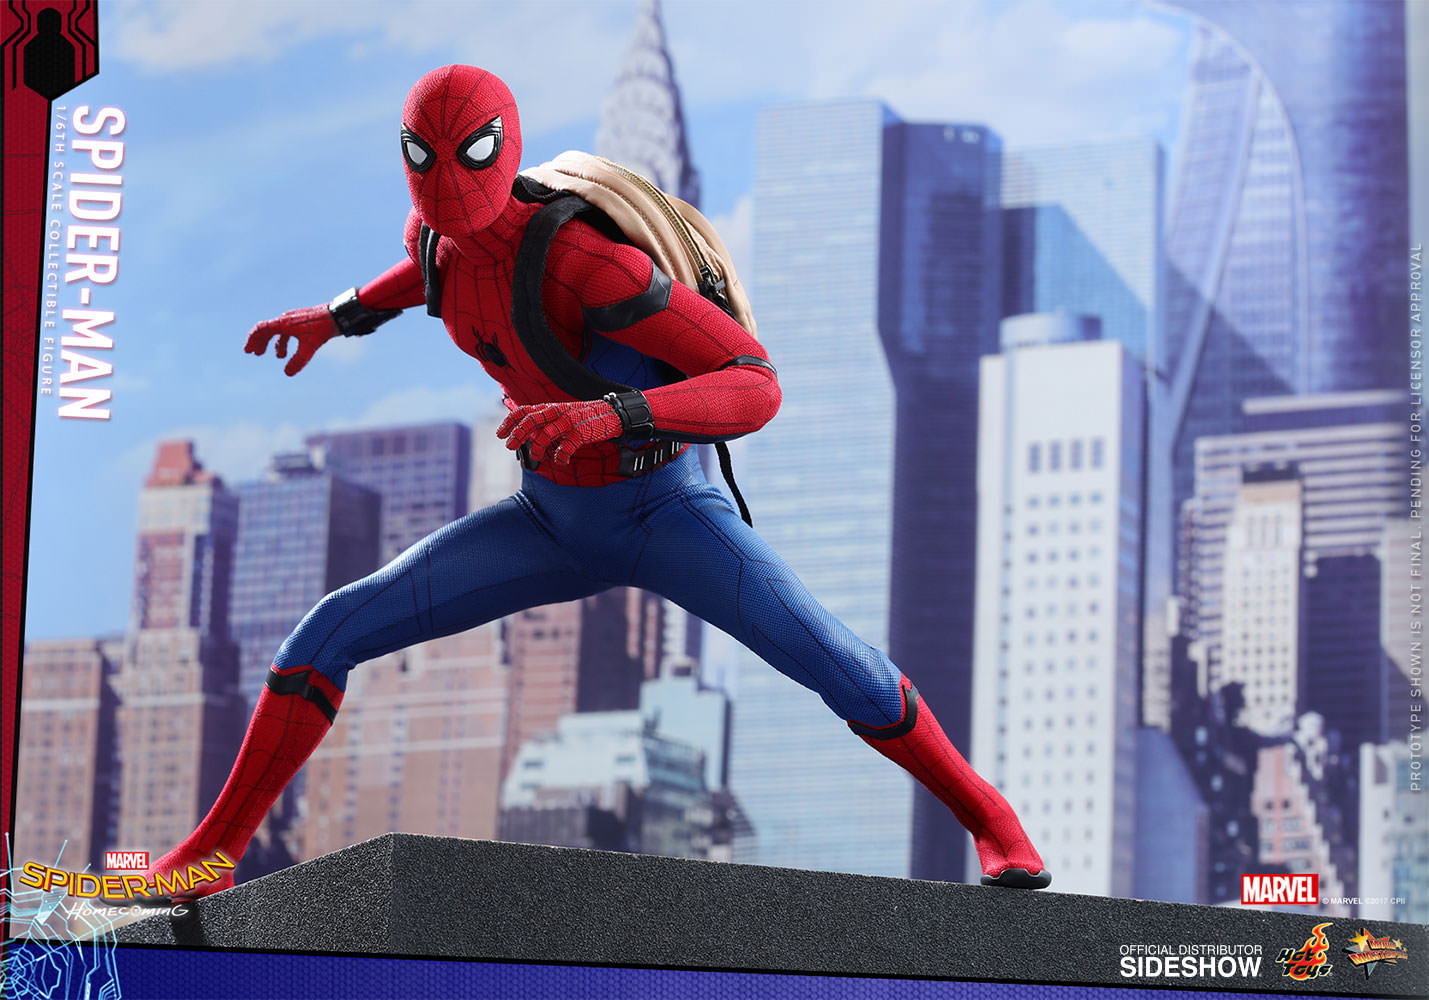 MARVEL: HOMECOMING – SPIDER MAN 1/6 Action Figure 12″ HOT TOYS | Edicollector1429 x 1000